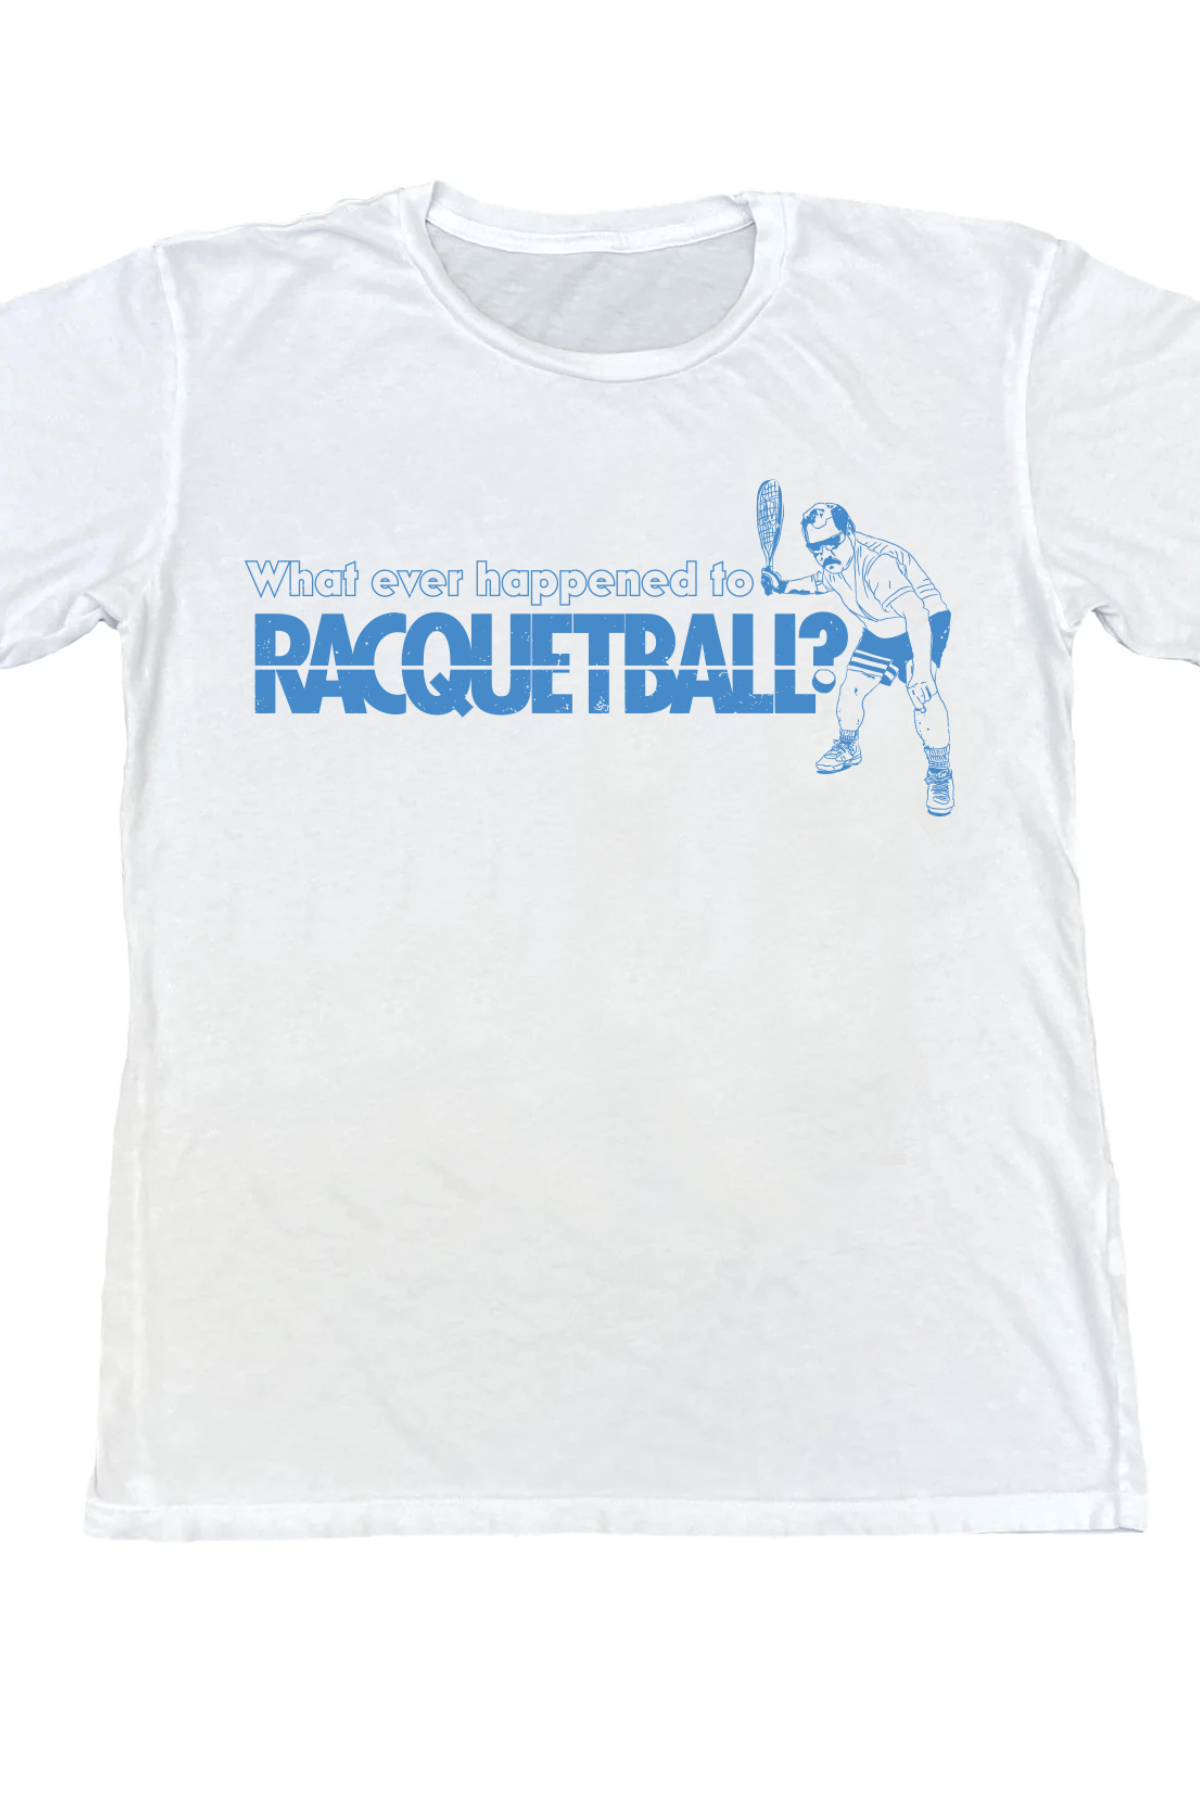 What Ever Happened to Racquetball Tees